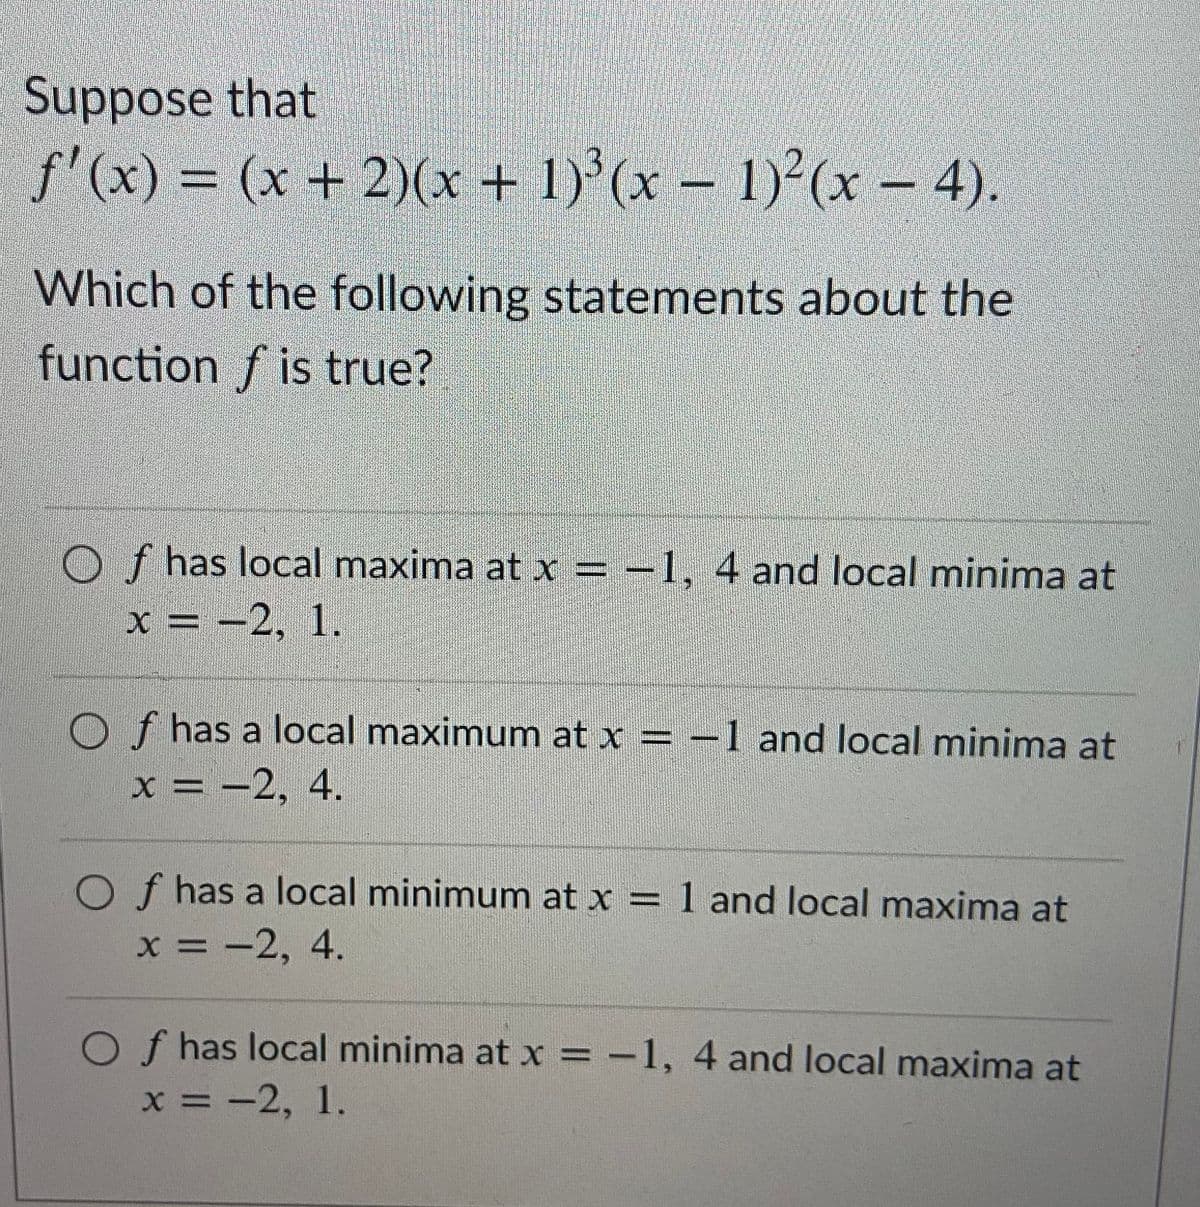 Suppose that
f'(x)% =
(x + 2X* + 1)(x-1)(x – 4).
Which of the following statements about the
function f is true?
O f has local maxima at x = -1, 4 and local minima at
x = -2, 1.
%3D
O f has a local maximum at x = -1 and local minima at
х %3D —2, 4.
O f has a local minimum at x = 1 and local maxima at
х 3D —2, 4.
O f has local minima at x = -1, 4 and local maxima at
х%3D — 2, 1.
